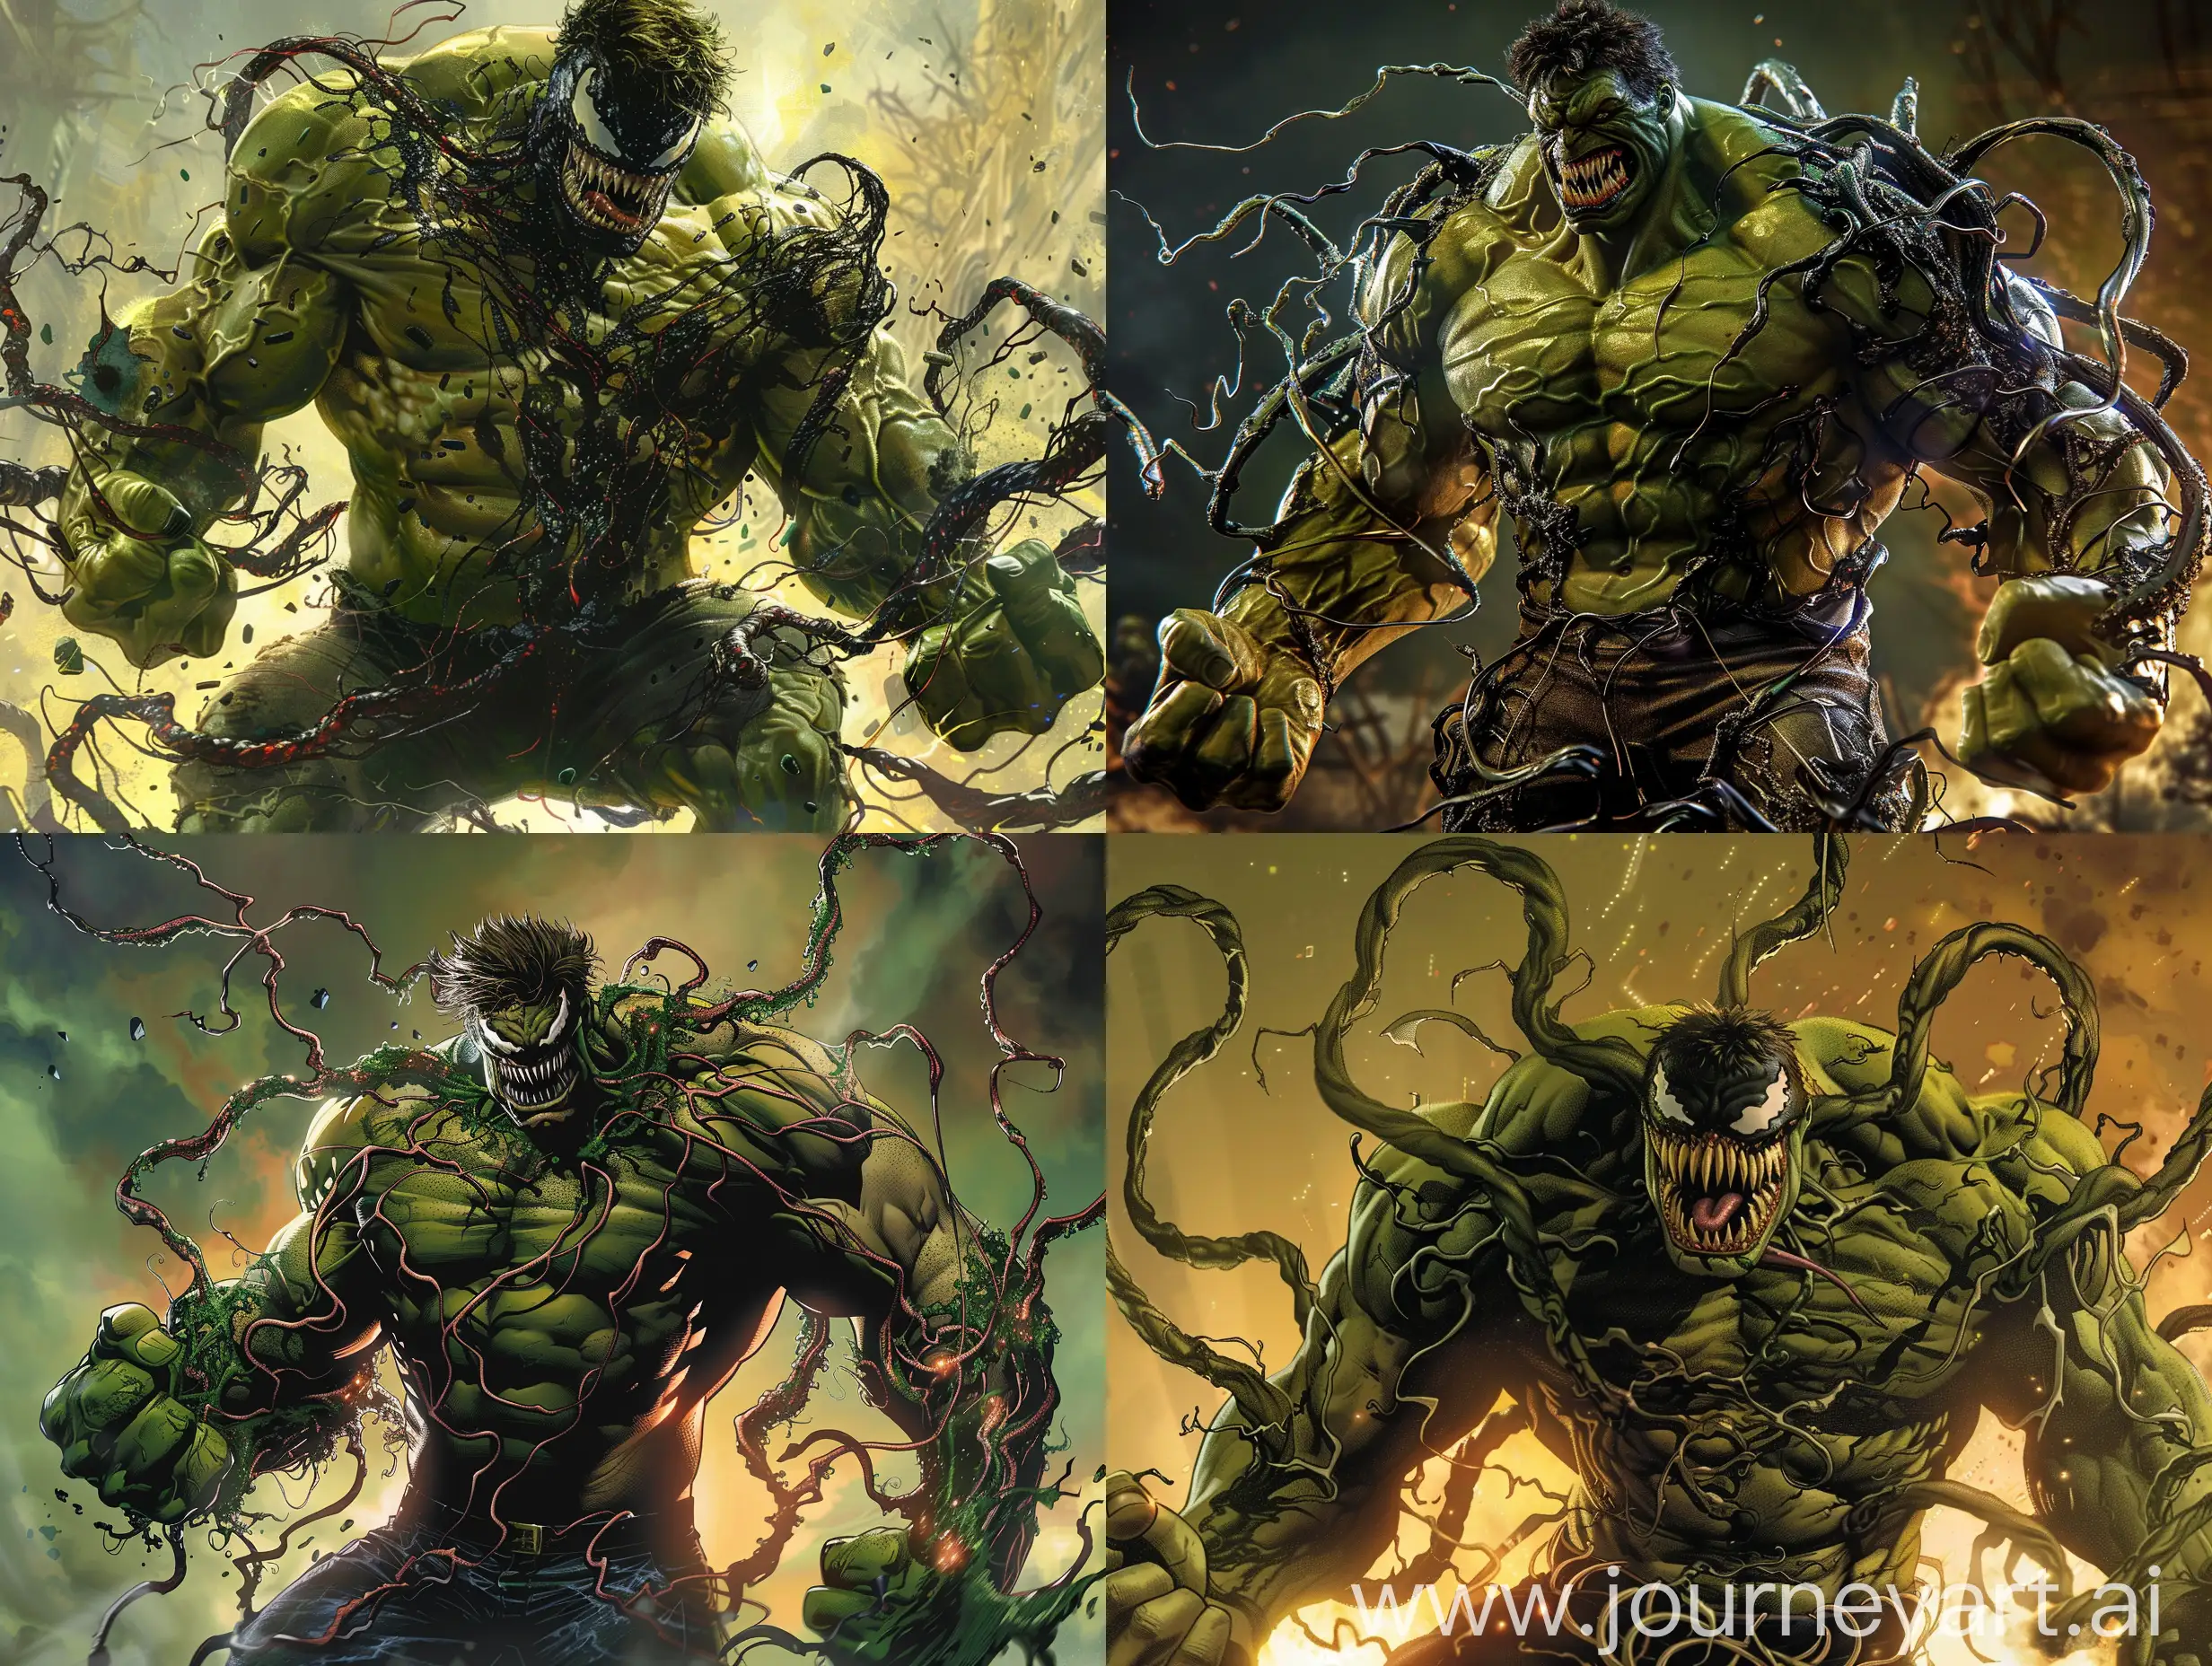 Witness the ultimate fusion of strength and darkness with tendrils of symbiote wrapping around Hulk's massive muscles as Hulk and Venom merge into one powerful being.